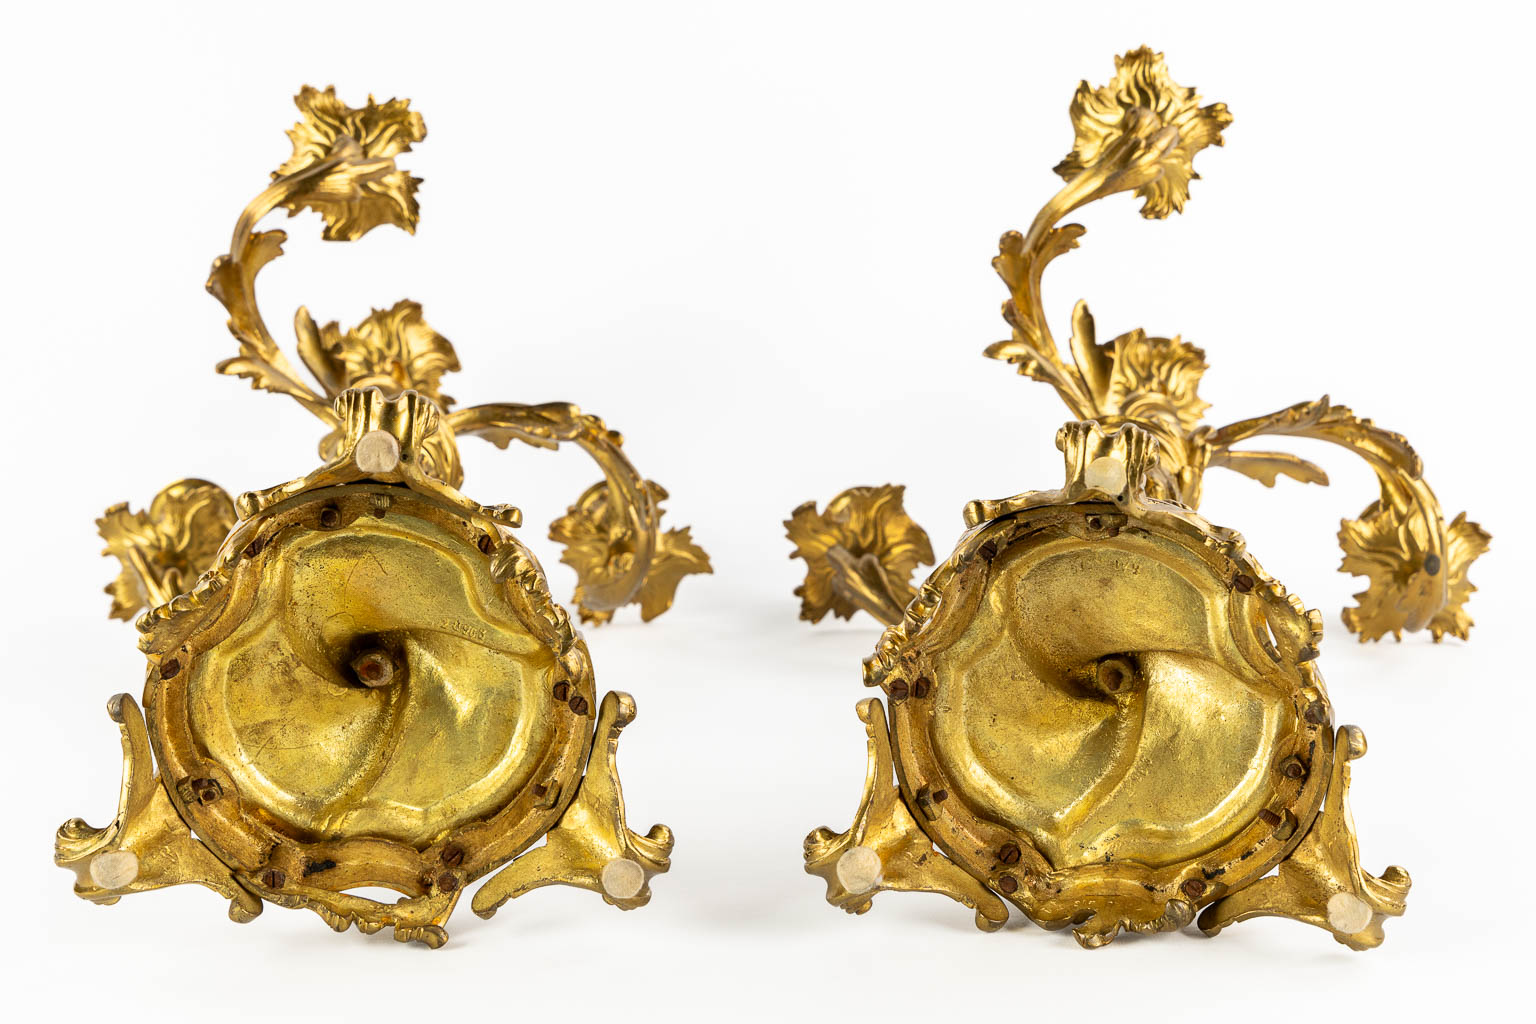 A pair of candelabra, bronze in Louis XV style. Circa 1900. (H:54 x D:27 cm) - Image 5 of 9